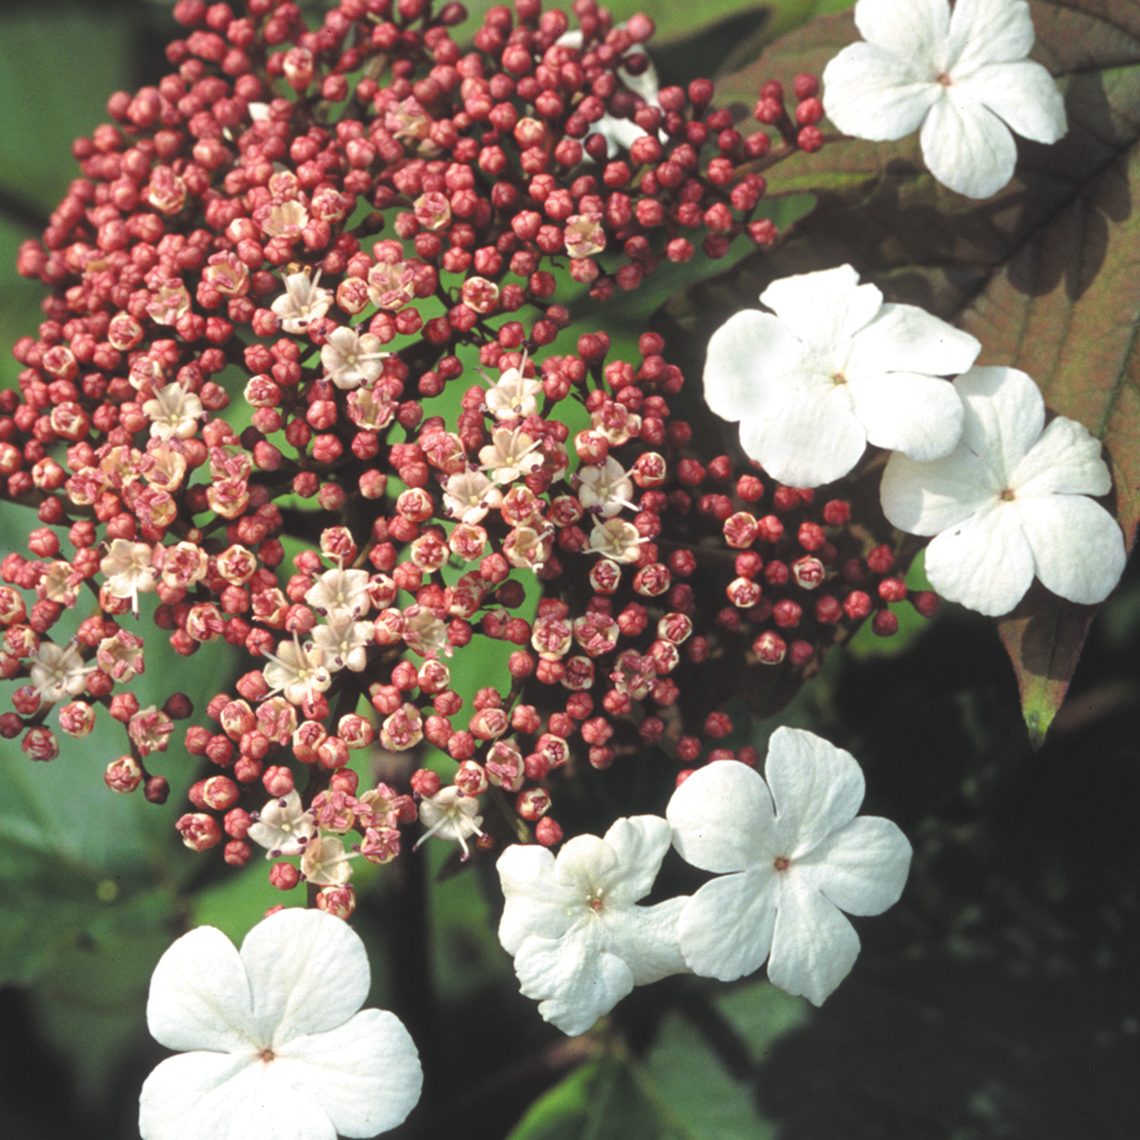 Lacecap flowers of Onondaga sargent viburnum with tiny pink florets in the center and large white sterile florets on the outer edge